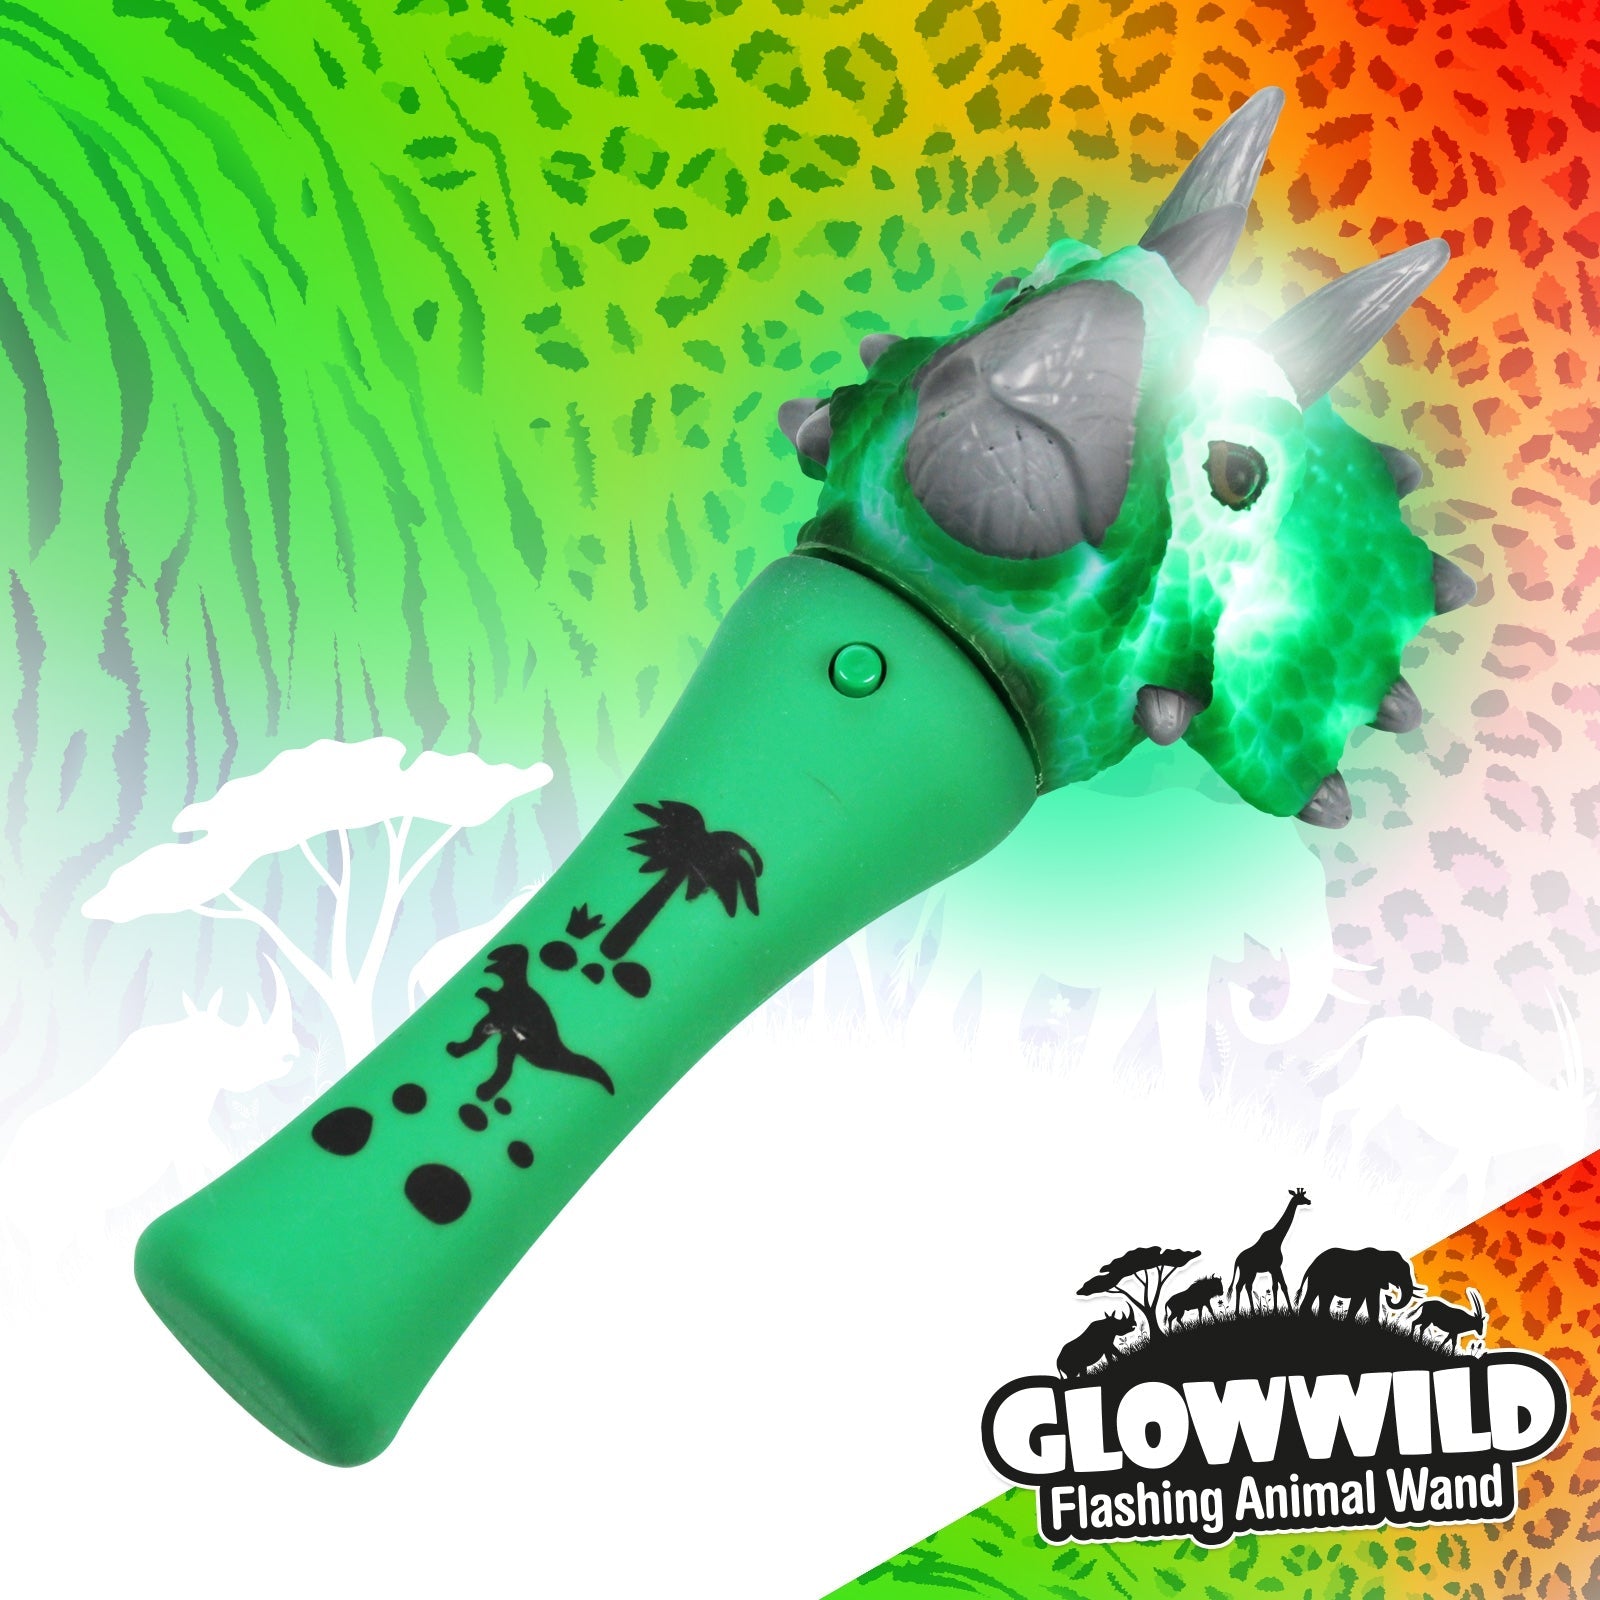 Triceratops Mini Light Up Animal Wand 7", Triceratops Mini Light Up Animal Wand 7" Description Bring Jurassic World to party time with this flashing dino wand topped with a triceratops head! Packed with colour change LEDs, this triceratops wand shines through a multi coloured light show with incredible flashing effects that will mesmerise! At 7" long, this Triceratops Mini Light Up Animal Wand is just the right size for younger party animals and it's simple on/of function make it easy to control. Glow Wild 